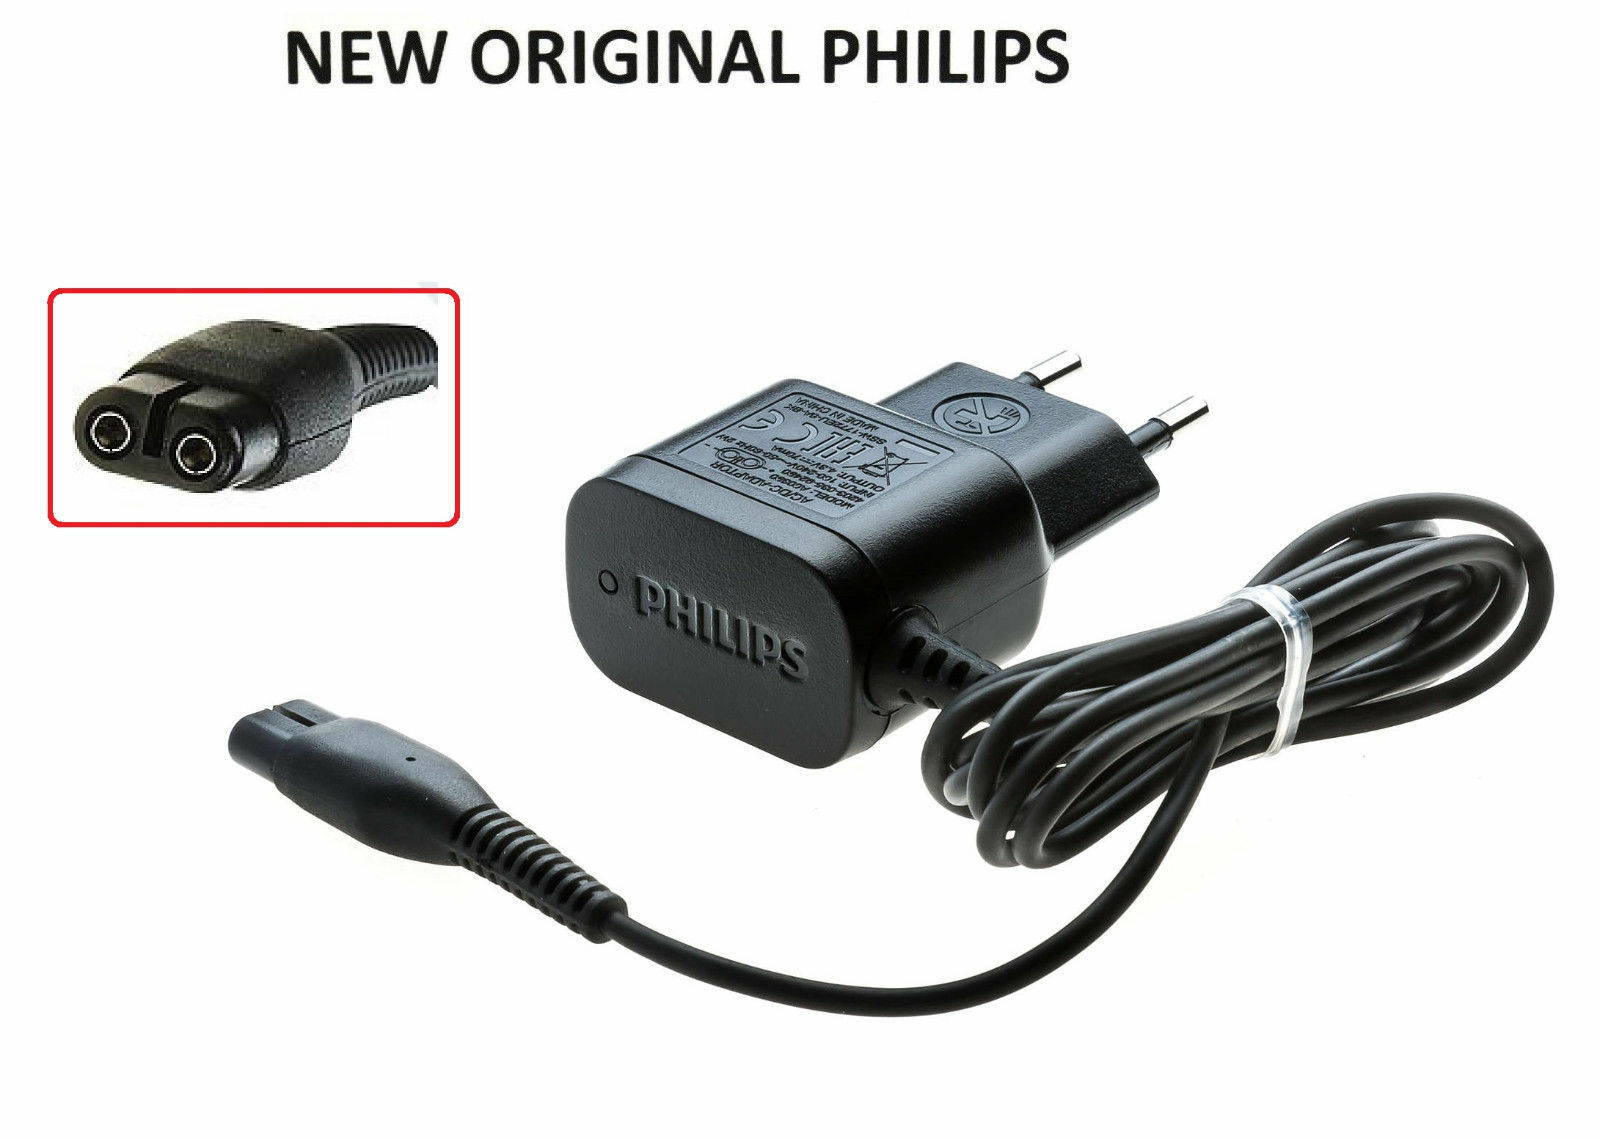 Euro Europe Plug AC Charger Supply Power Adapter For Philips Trimmer Shaver MPN: 422203629001 100-240V~ 50/60Hz 2W 4